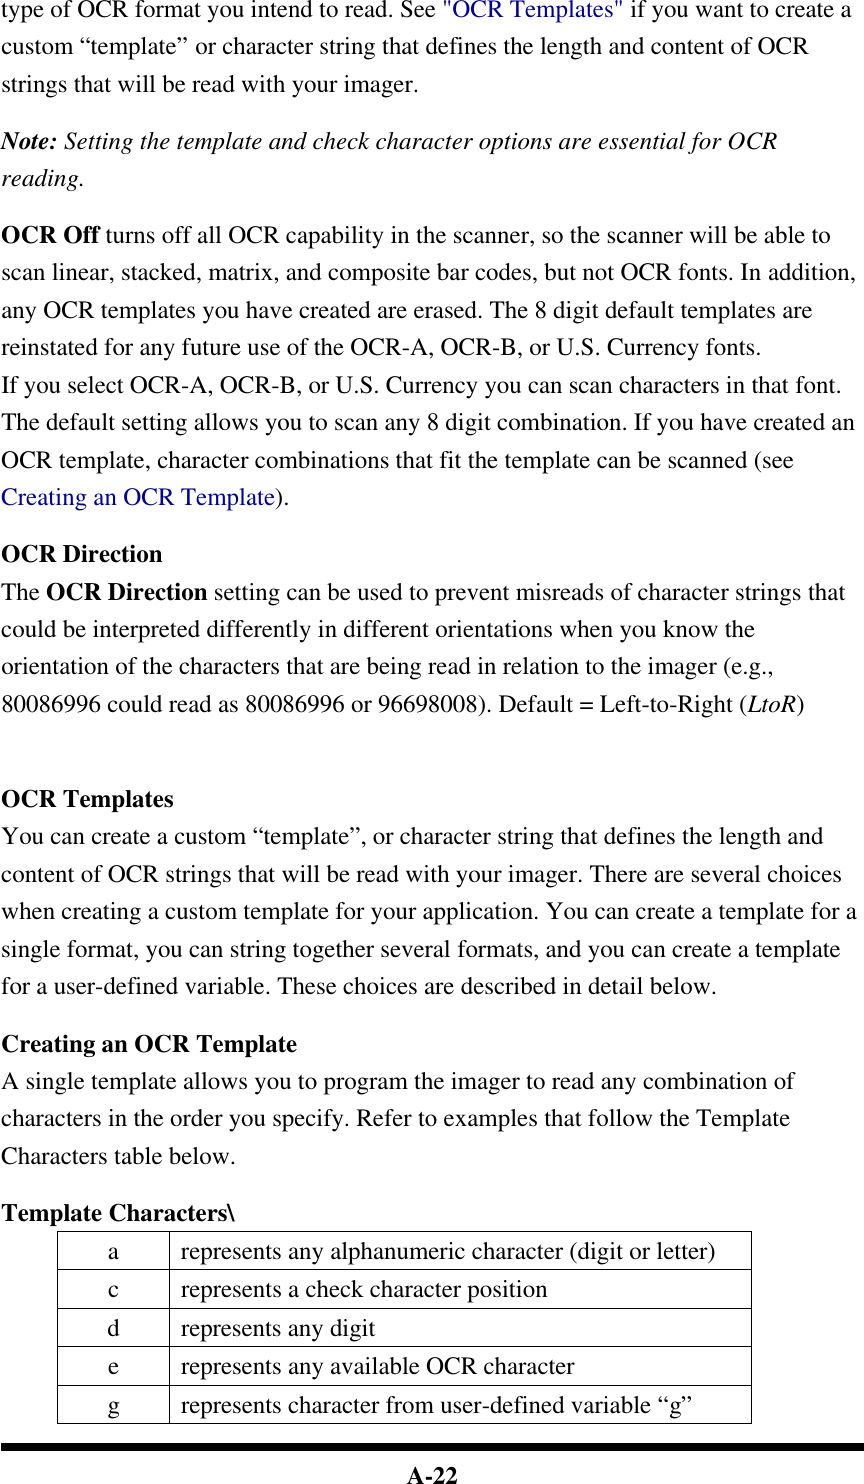  A-22 type of OCR format you intend to read. See &quot;OCR Templates&quot; if you want to create a custom “template” or character string that defines the length and content of OCR strings that will be read with your imager.  Note: Setting the template and check character options are essential for OCR reading.  OCR Off turns off all OCR capability in the scanner, so the scanner will be able to scan linear, stacked, matrix, and composite bar codes, but not OCR fonts. In addition, any OCR templates you have created are erased. The 8 digit default templates are reinstated for any future use of the OCR-A, OCR-B, or U.S. Currency fonts. If you select OCR-A, OCR-B, or U.S. Currency you can scan characters in that font. The default setting allows you to scan any 8 digit combination. If you have created an OCR template, character combinations that fit the template can be scanned (see Creating an OCR Template).  OCR Direction The OCR Direction setting can be used to prevent misreads of character strings that could be interpreted differently in different orientations when you know the orientation of the characters that are being read in relation to the imager (e.g., 80086996 could read as 80086996 or 96698008). Default = Left-to-Right (LtoR)    OCR Templates You can create a custom “template”, or character string that defines the length and content of OCR strings that will be read with your imager. There are several choices when creating a custom template for your application. You can create a template for a single format, you can string together several formats, and you can create a template for a user-defined variable. These choices are described in detail below.  Creating an OCR Template A single template allows you to program the imager to read any combination of characters in the order you specify. Refer to examples that follow the Template Characters table below.  Template Characters\ a represents any alphanumeric character (digit or letter) c represents a check character position d  represents any digit e represents any available OCR character g  represents character from user-defined variable “g” 